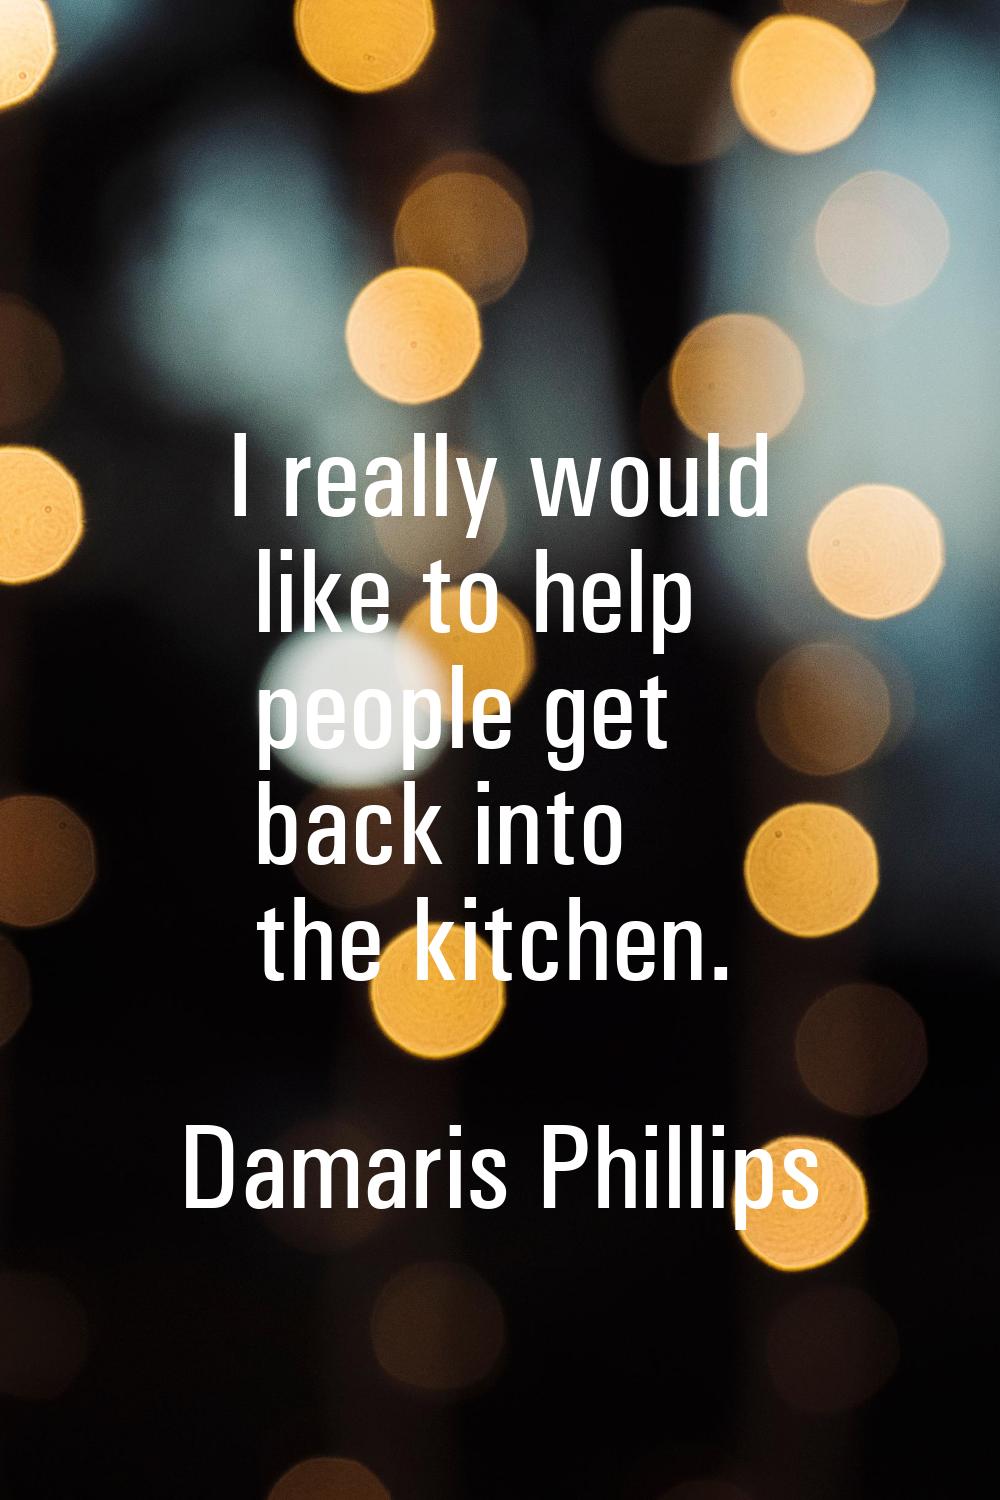 I really would like to help people get back into the kitchen.